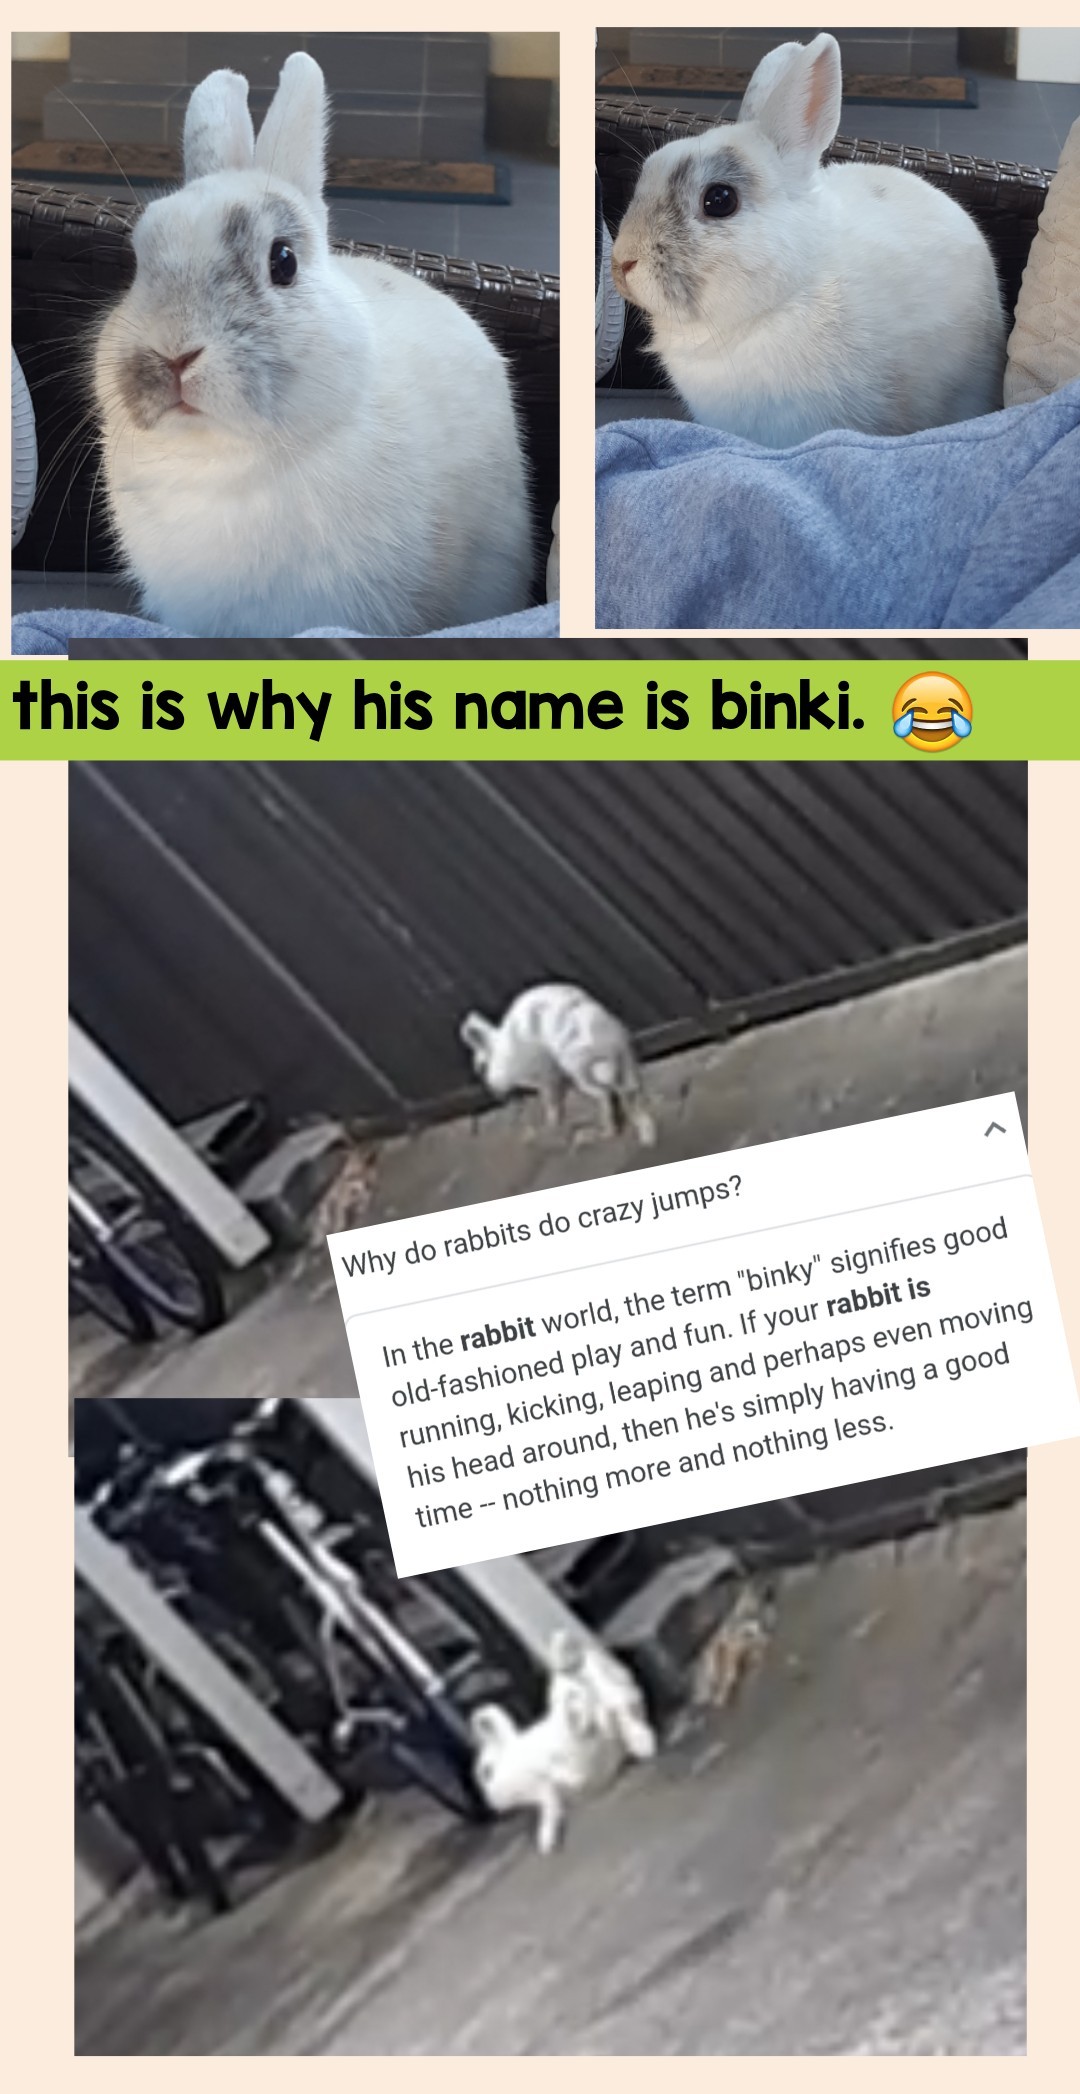 when we got Binki in December last year, he was nameless until we started letting him play in our backyard. 🐰 he was doing these strange jumps, so we searched it up and found out they are called Binkies. We then called him Binki 😂